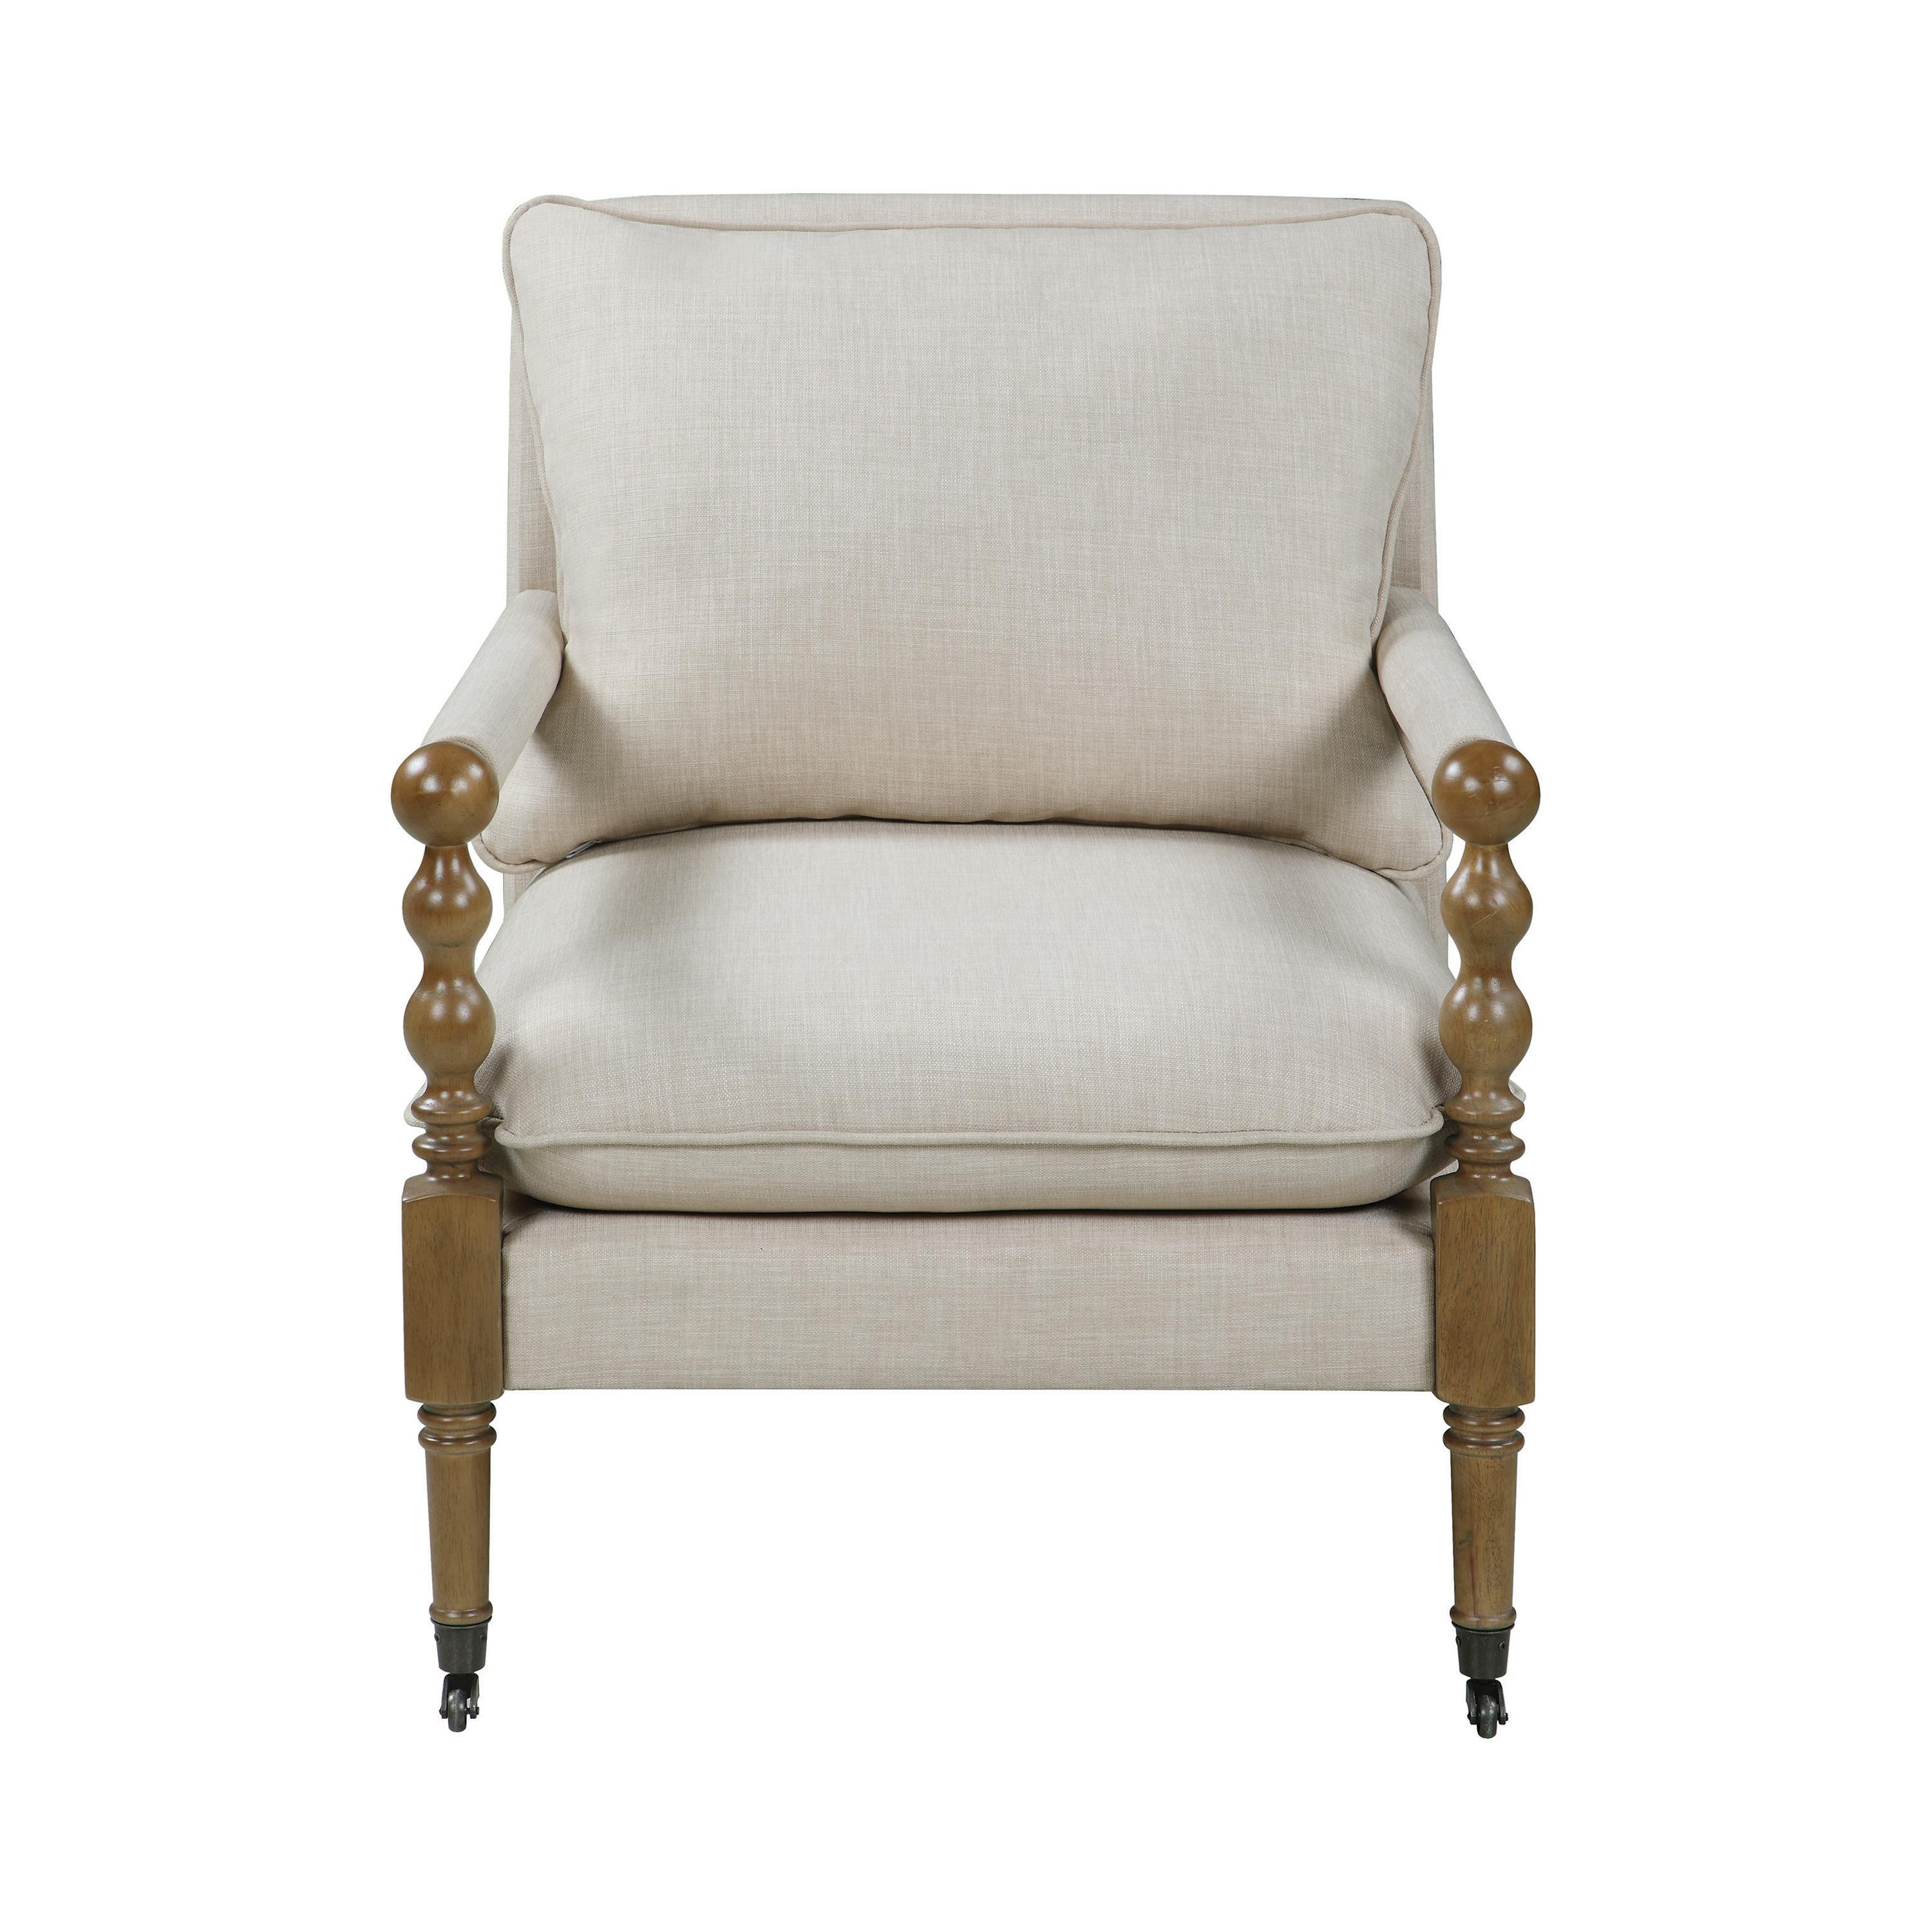 Transitional Accent Chair 903058 903058 in Beige 